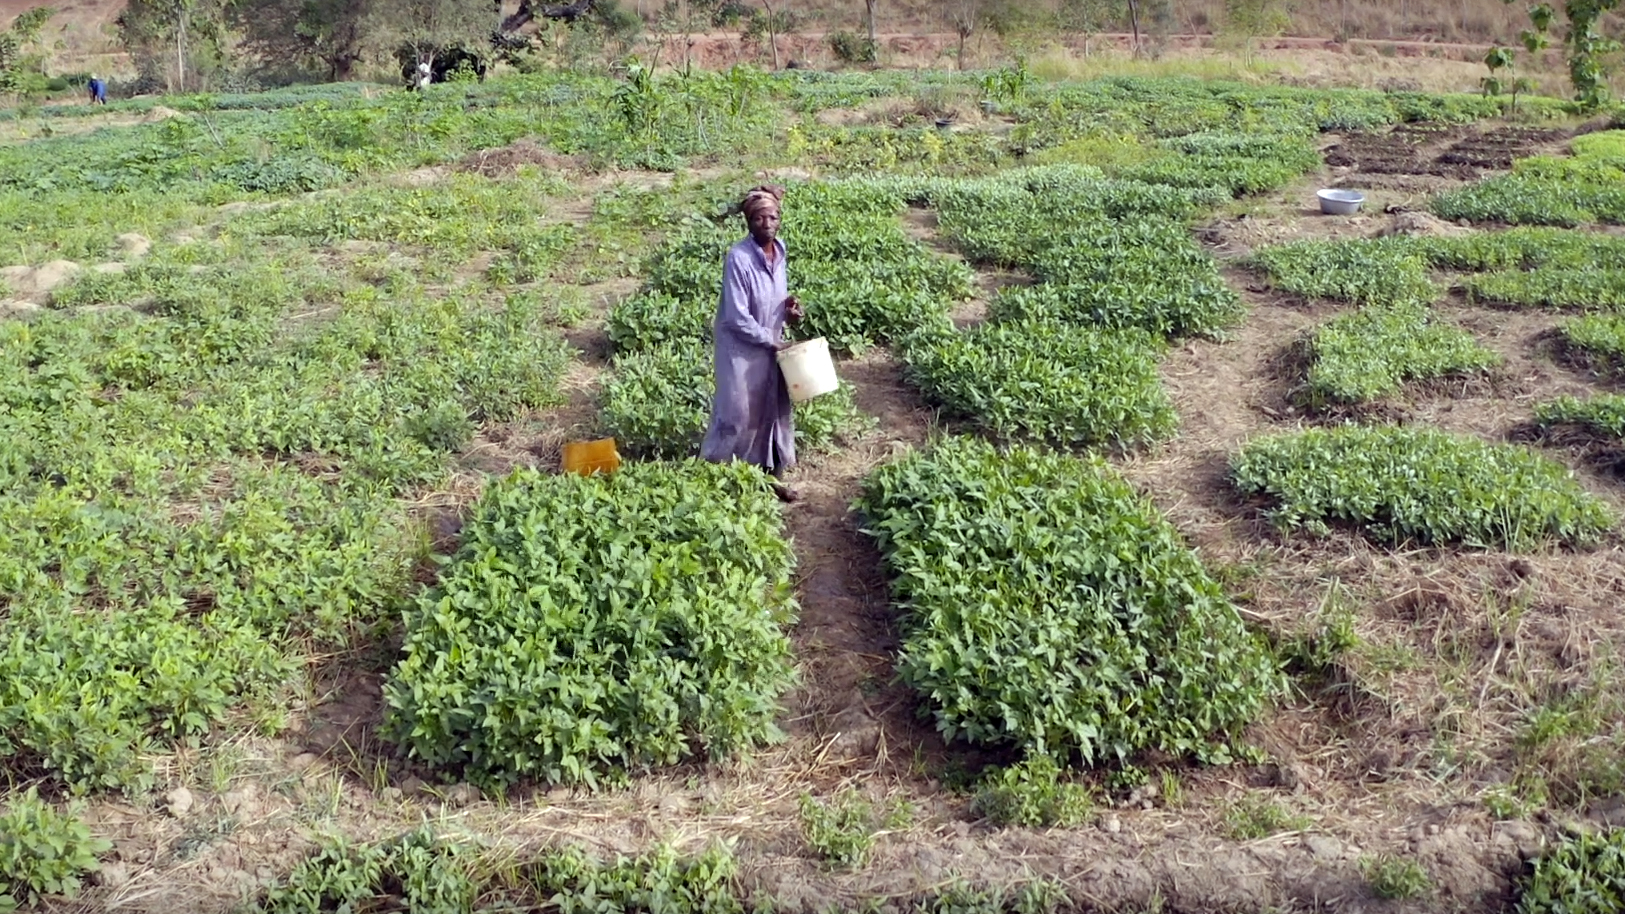 Still from the video "Impacts of climate change on crop production in Ghana's Upper West Region"